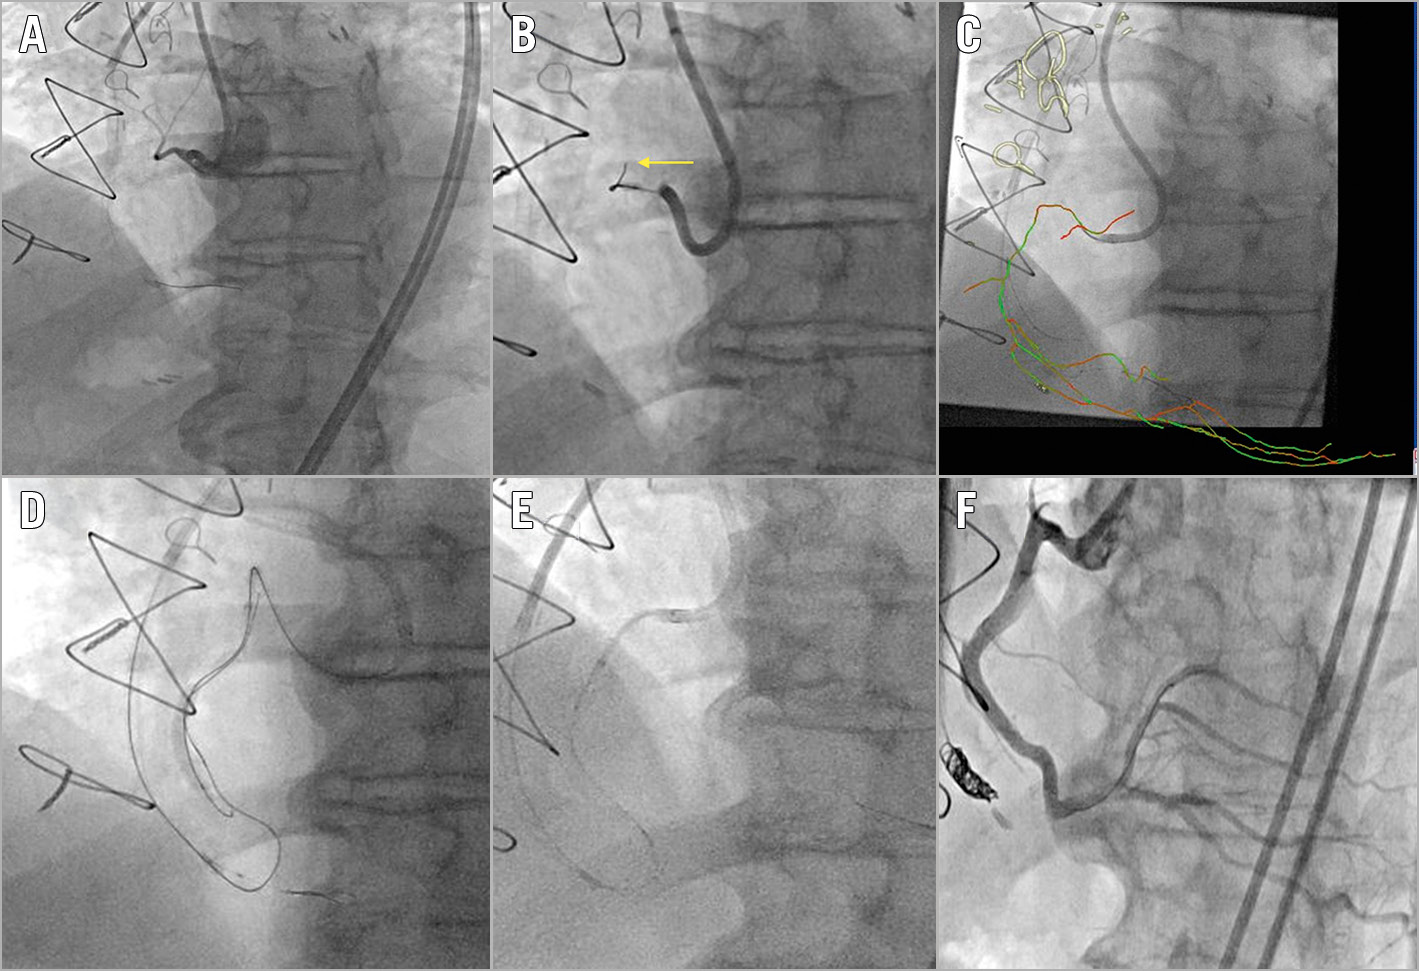 Figure 1. Computed tomography angiography (CTA)/real-time fluoroscopy fusion to clarify proximal cap ambiguity. Proximal right coronary artery (RCA) chronic total occlusion with proximal cap ambiguity due to the presence of obscuring side branches (A). The wire kept entering into the side branches (arrow) (B). Upward course of the RCA clarified with CTA/coronary fluoroscopy co-registration (C). The antegrade wire entered the subintimal space. It was then decided to proceed with reverse controlled antegrade and retrograde subintimal tracking (D). Four drug-eluting stents were implanted with the aid of a GuideLiner® guide extension (Teleflex Medical, Wayne, PA, USA) (E). Final result (F).